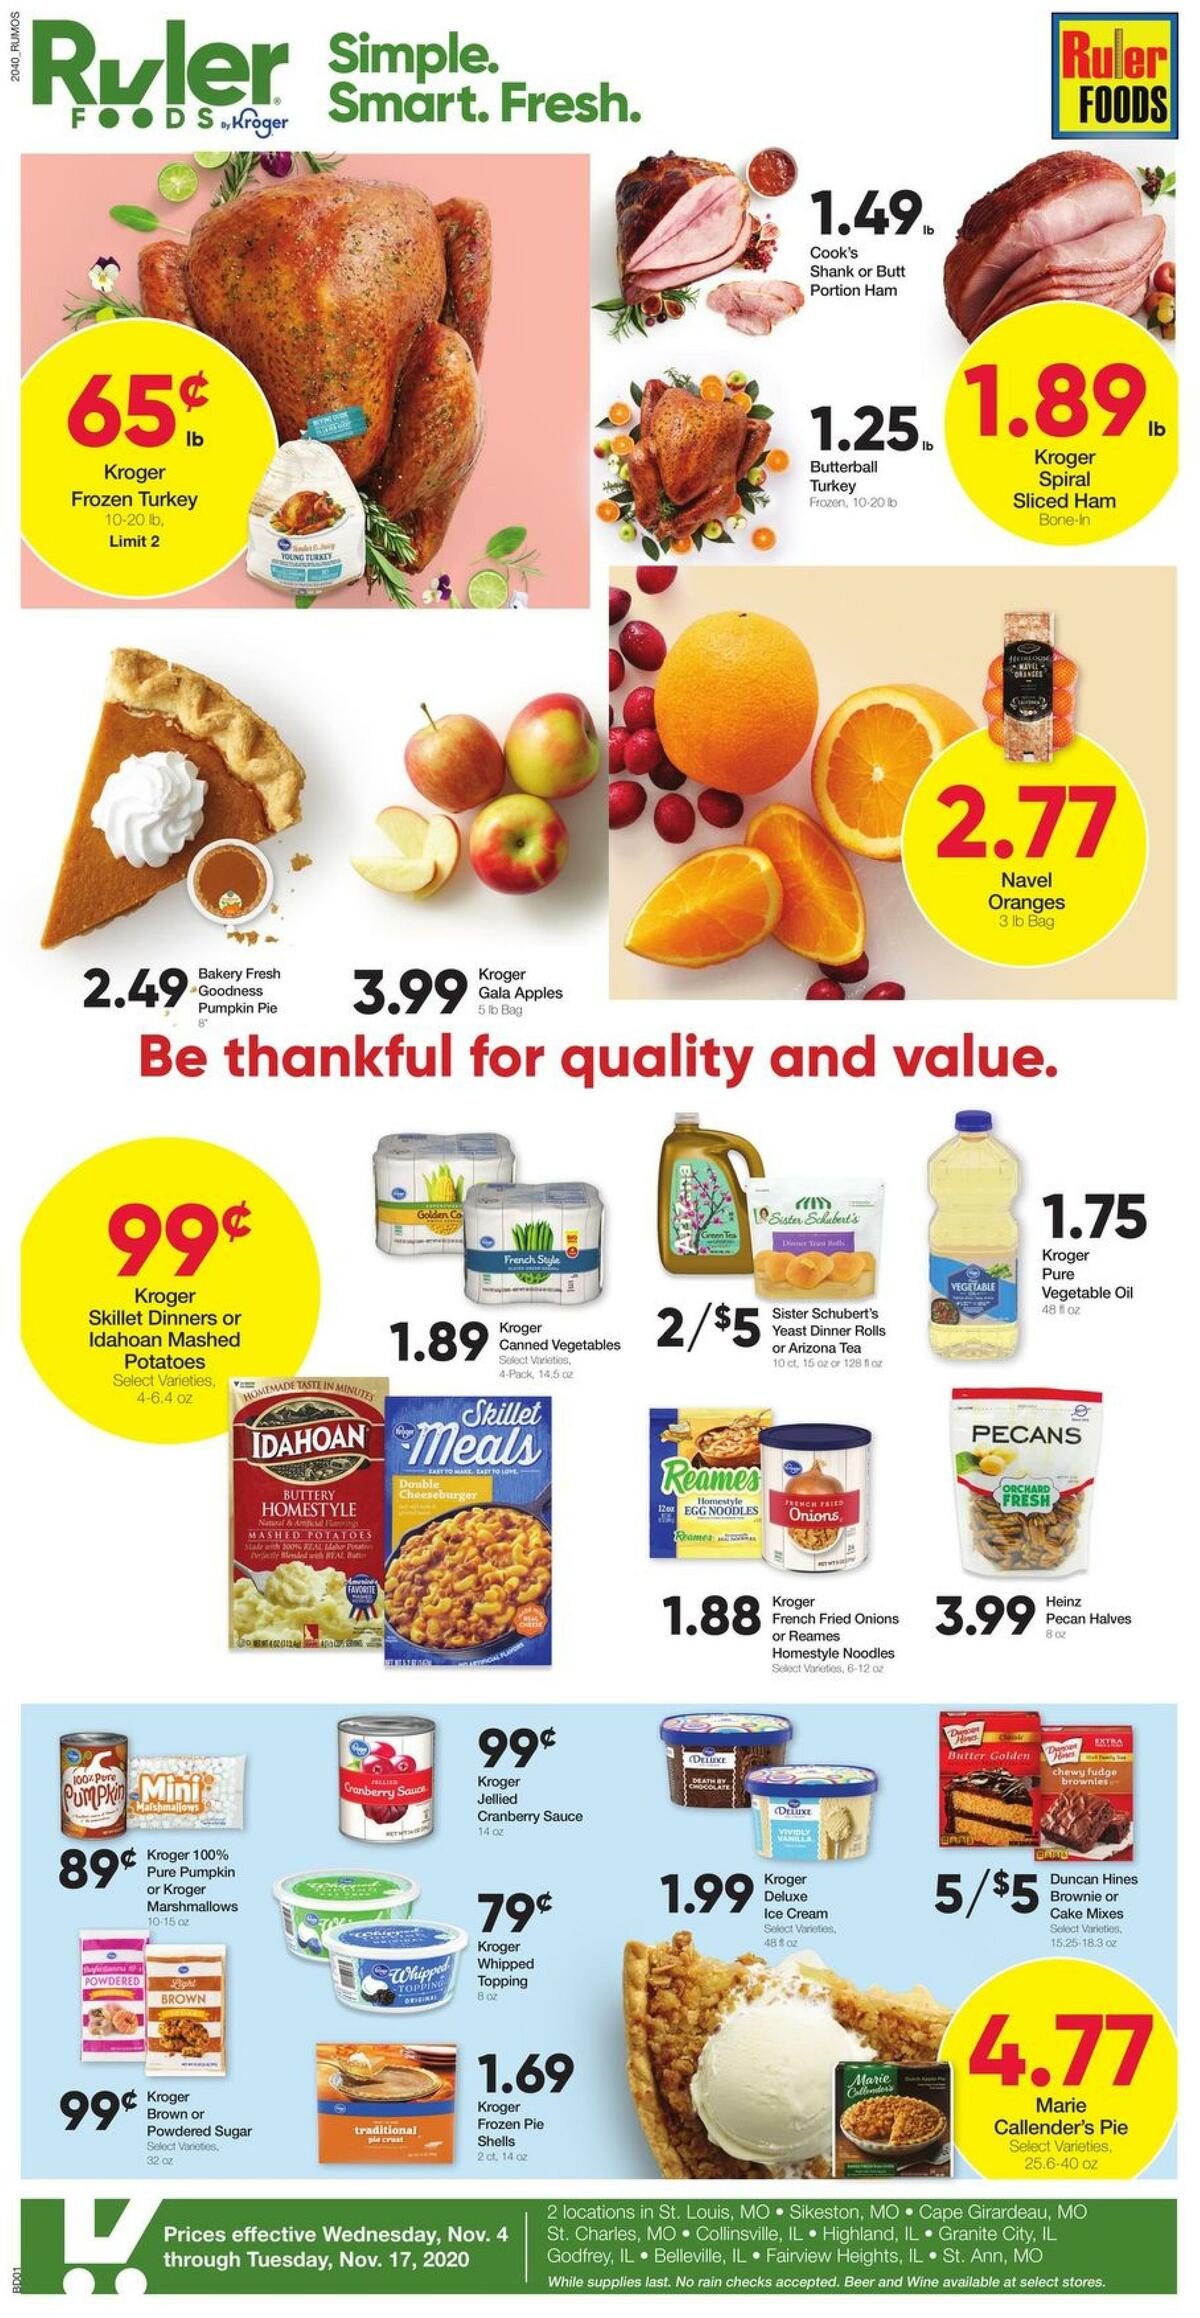 Ruler Foods Weekly Ad from November 4